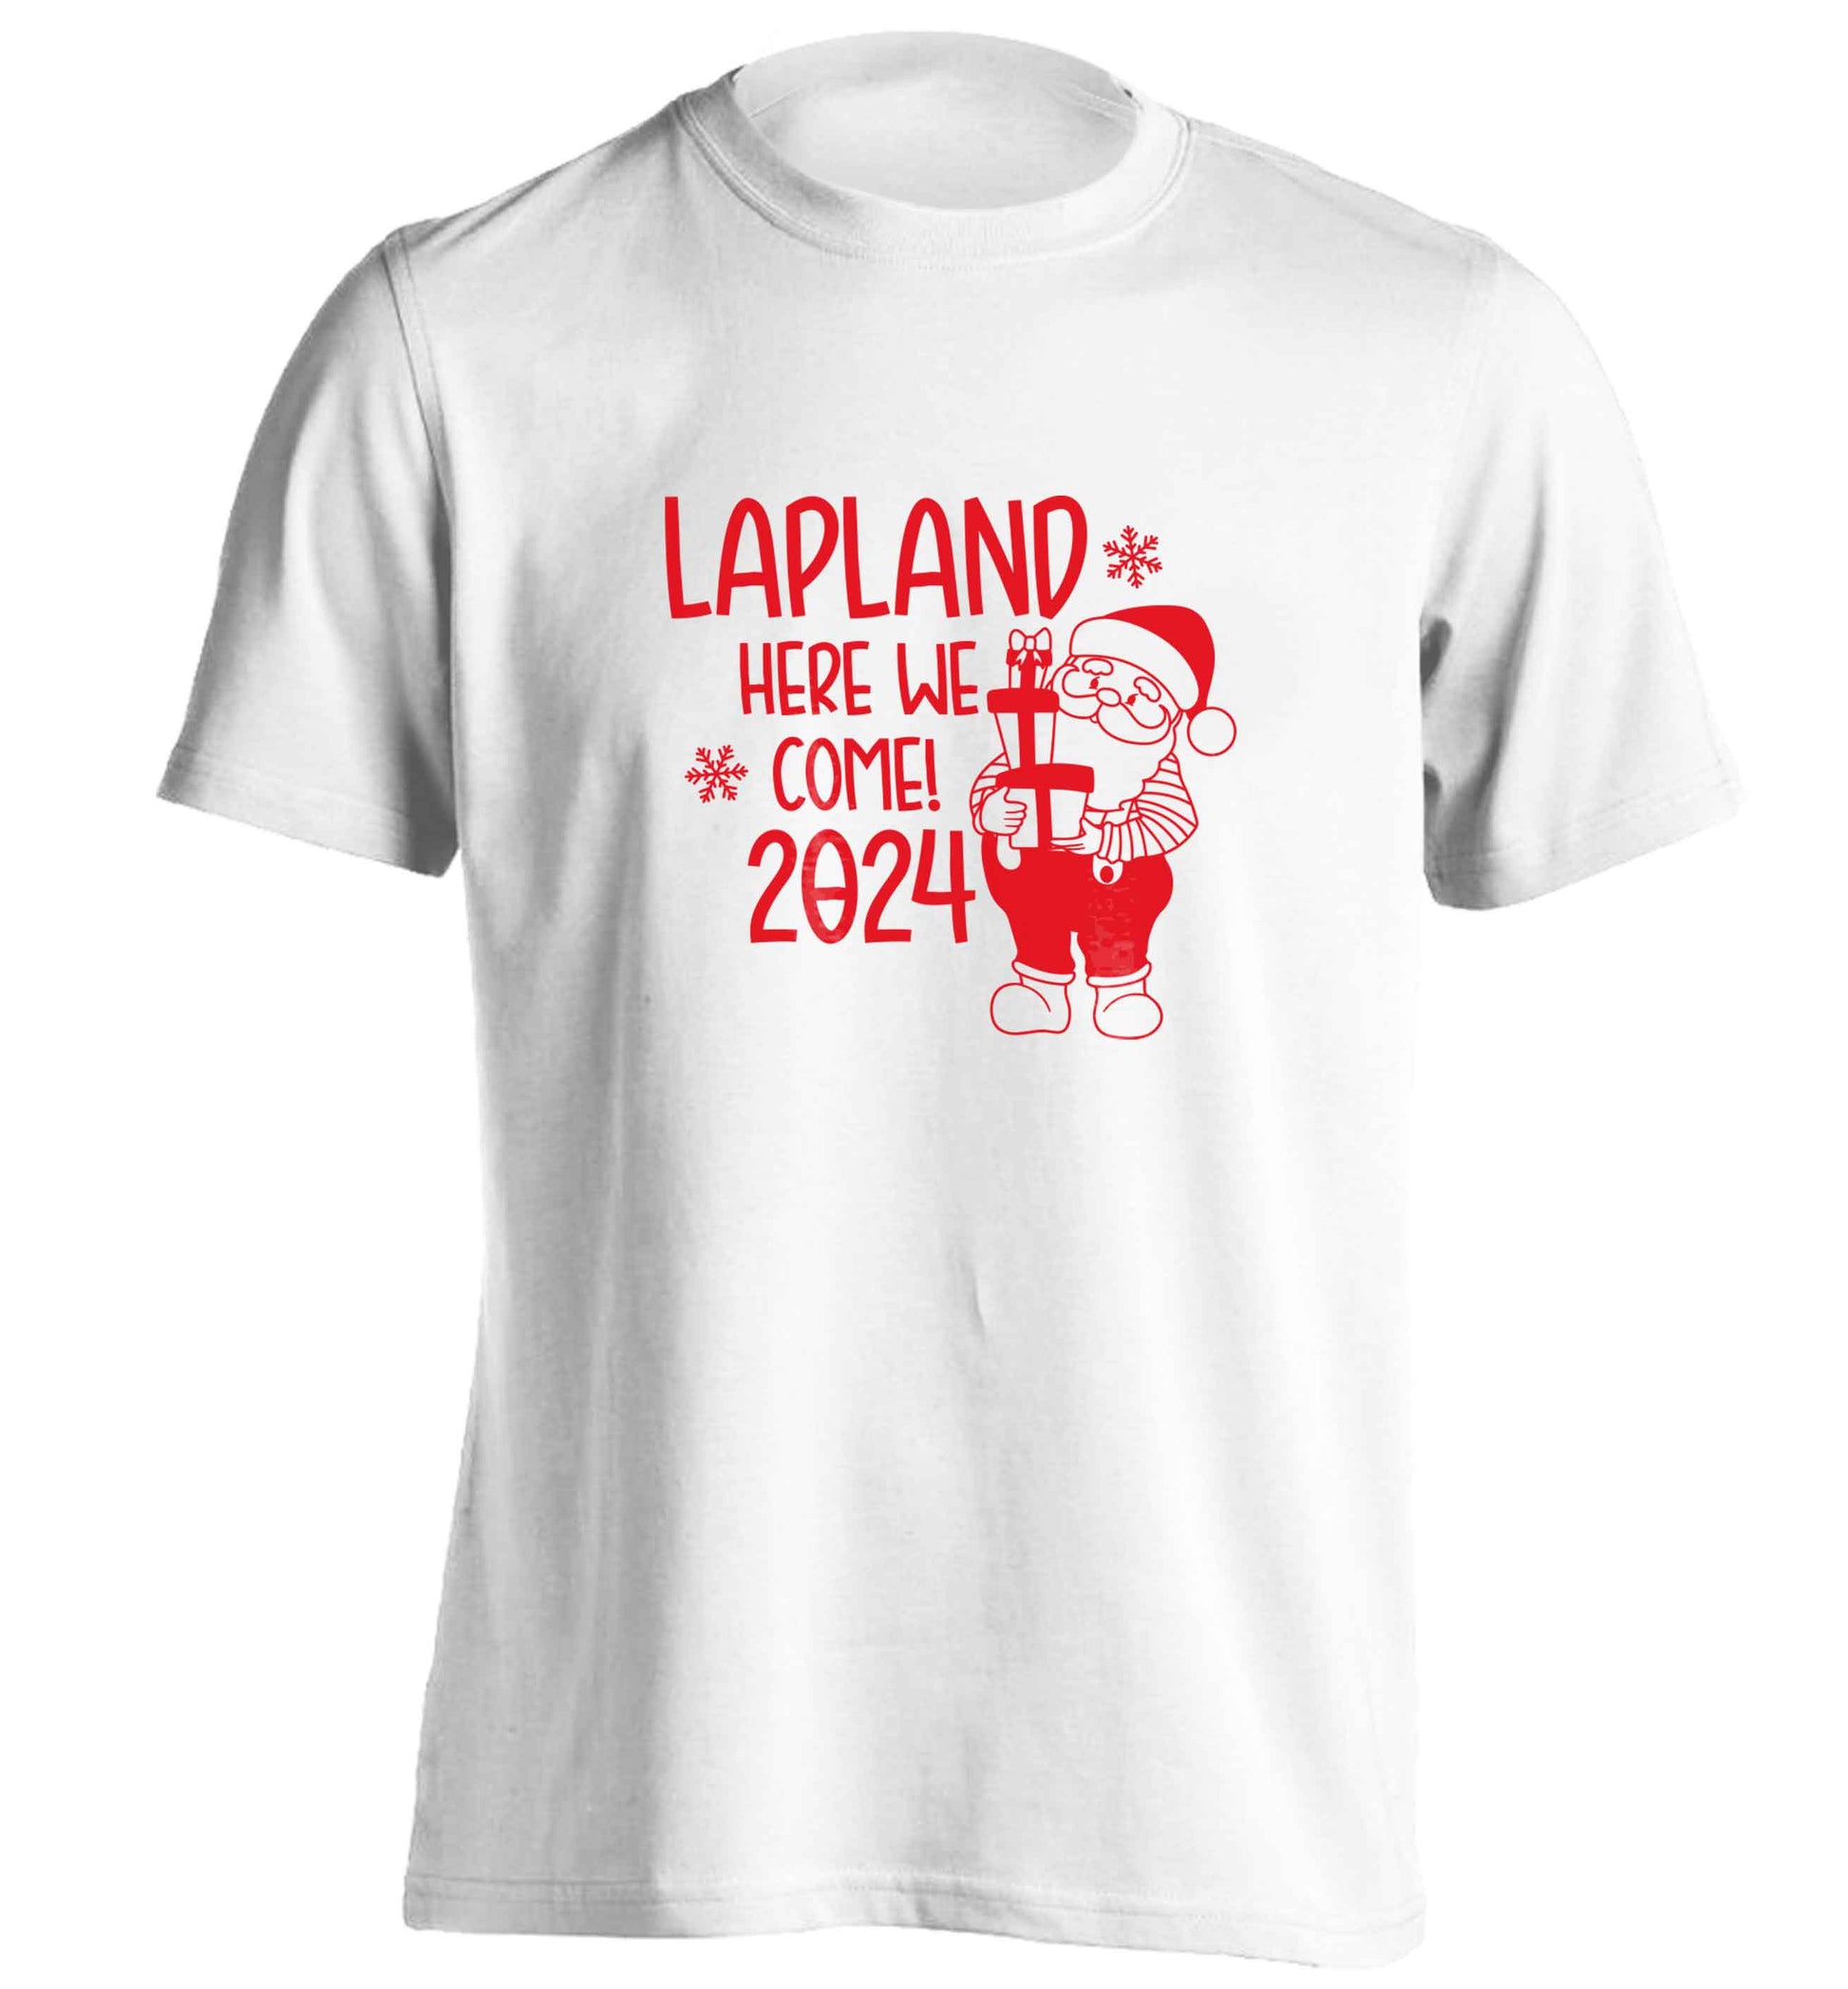 Lapland here we come adults unisex white Tshirt 2XL